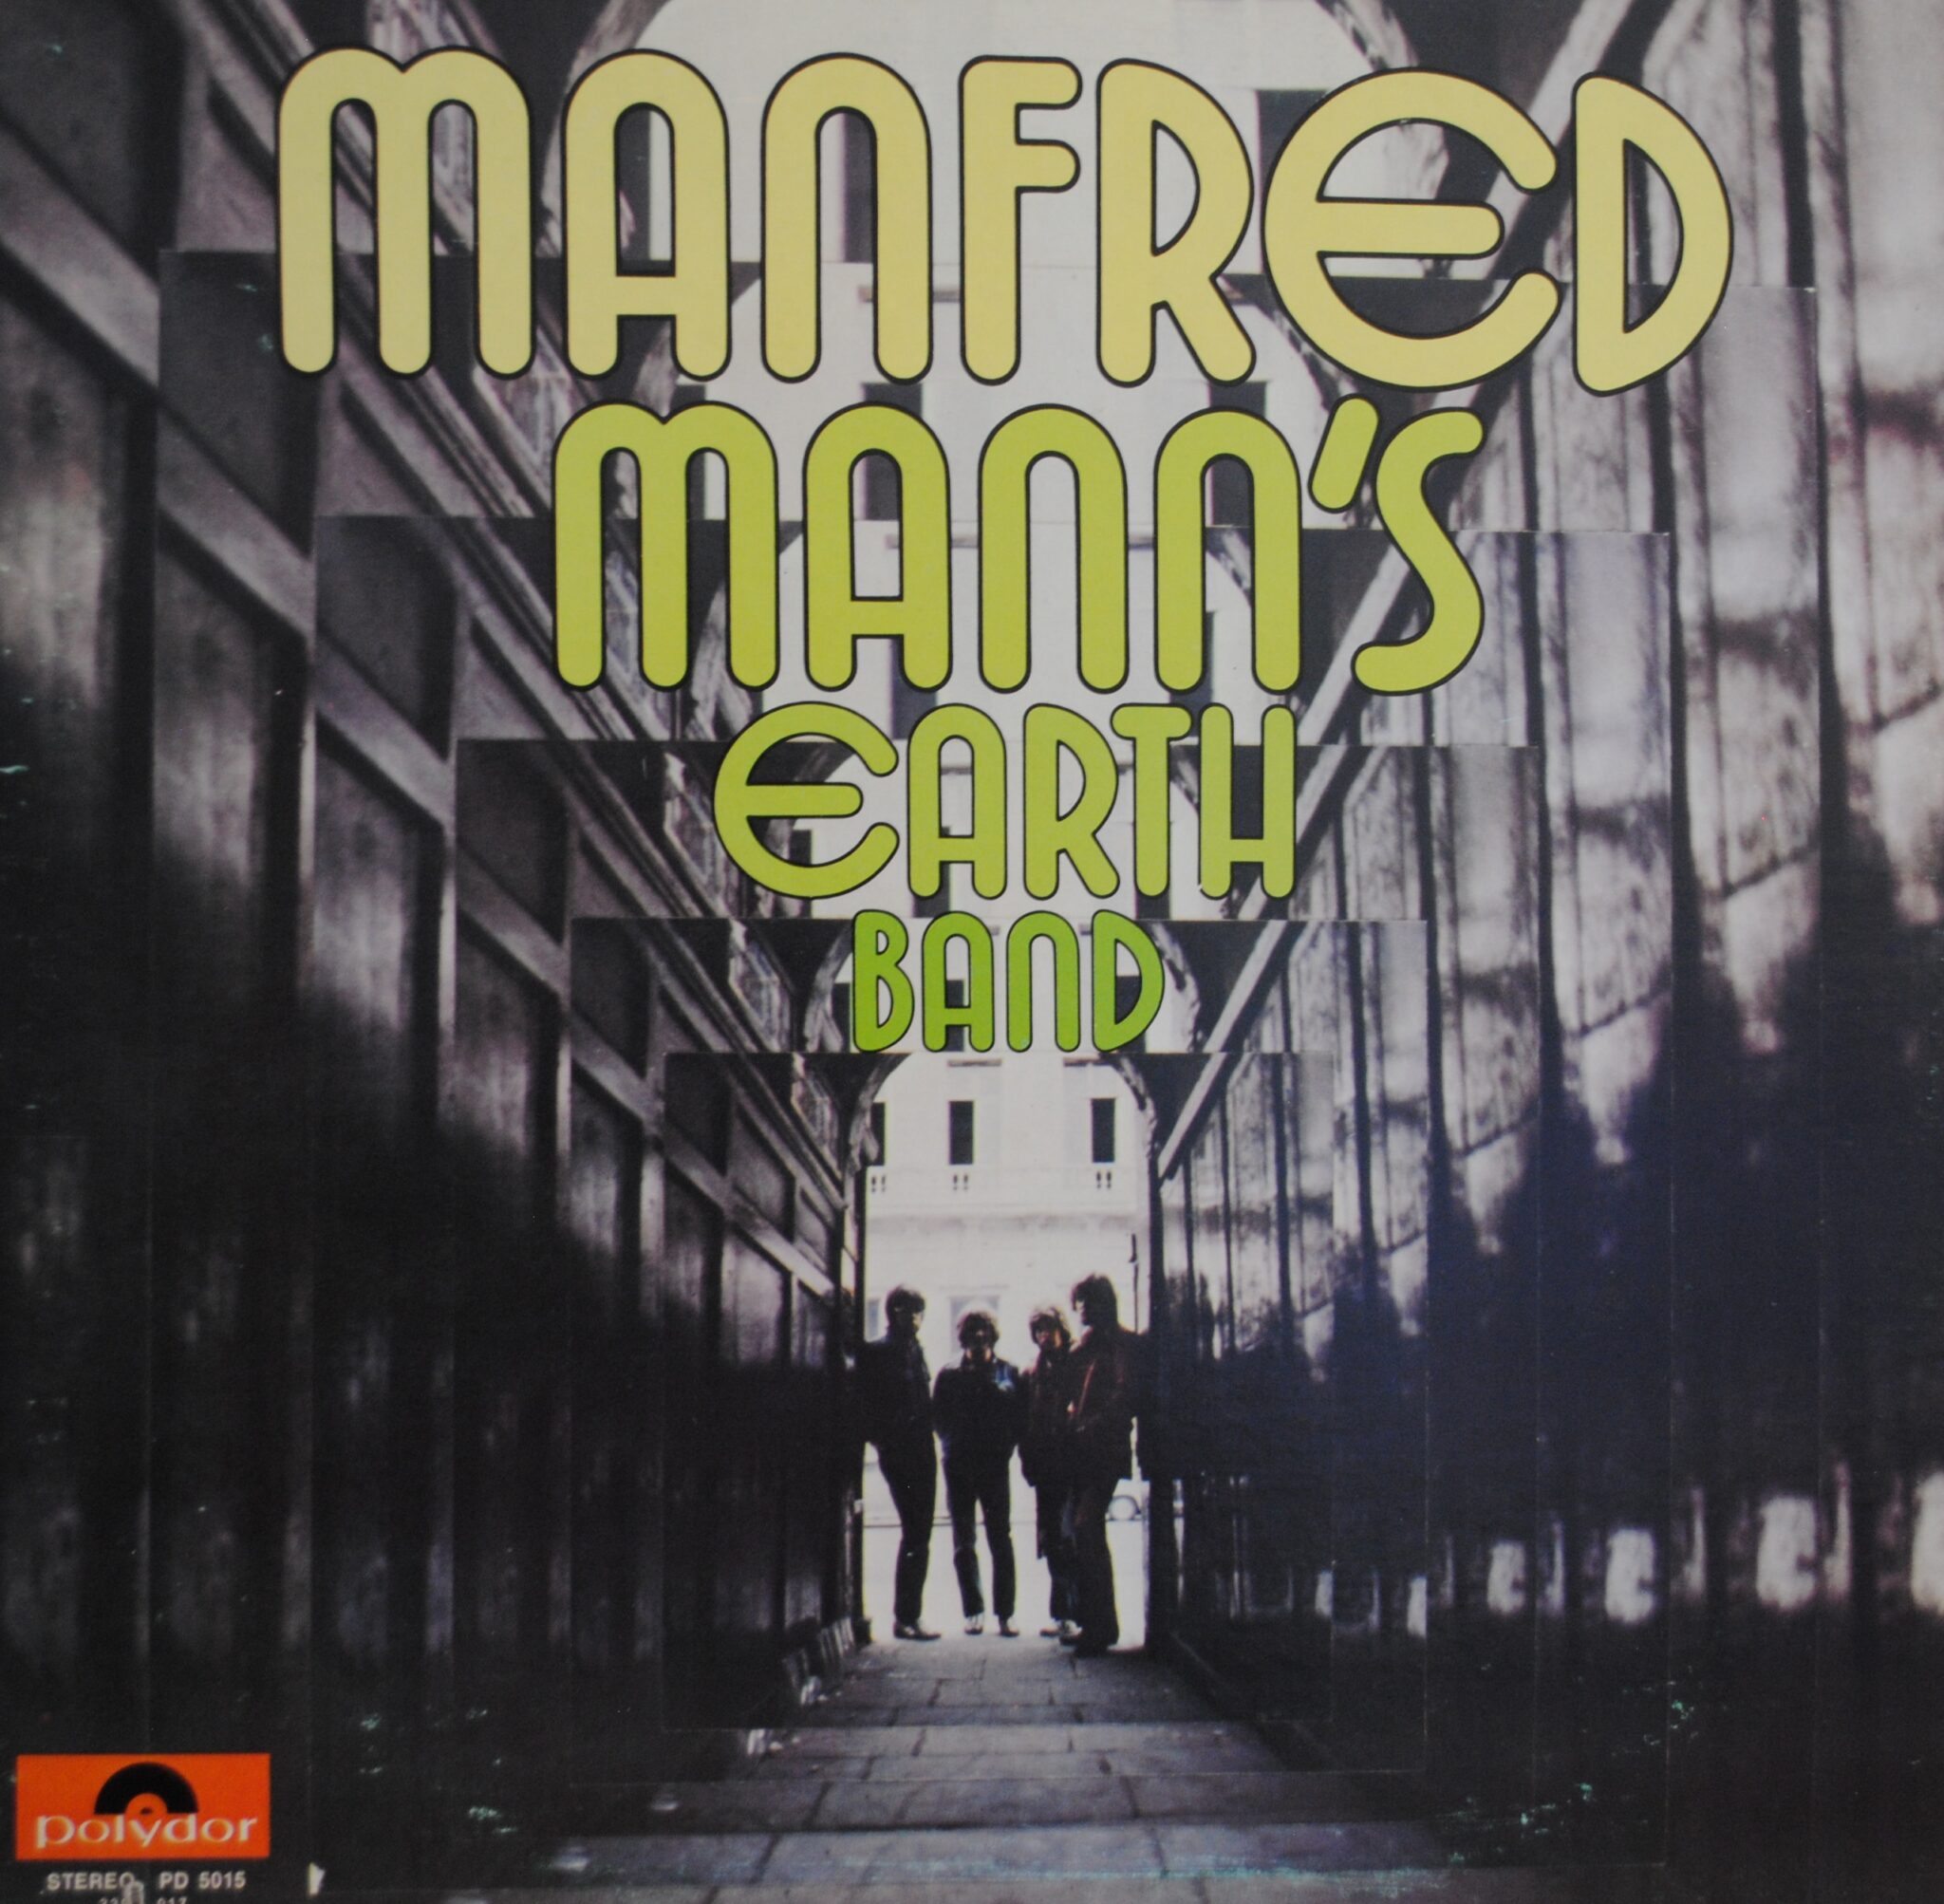 manfred mann's earth band uk tour dates